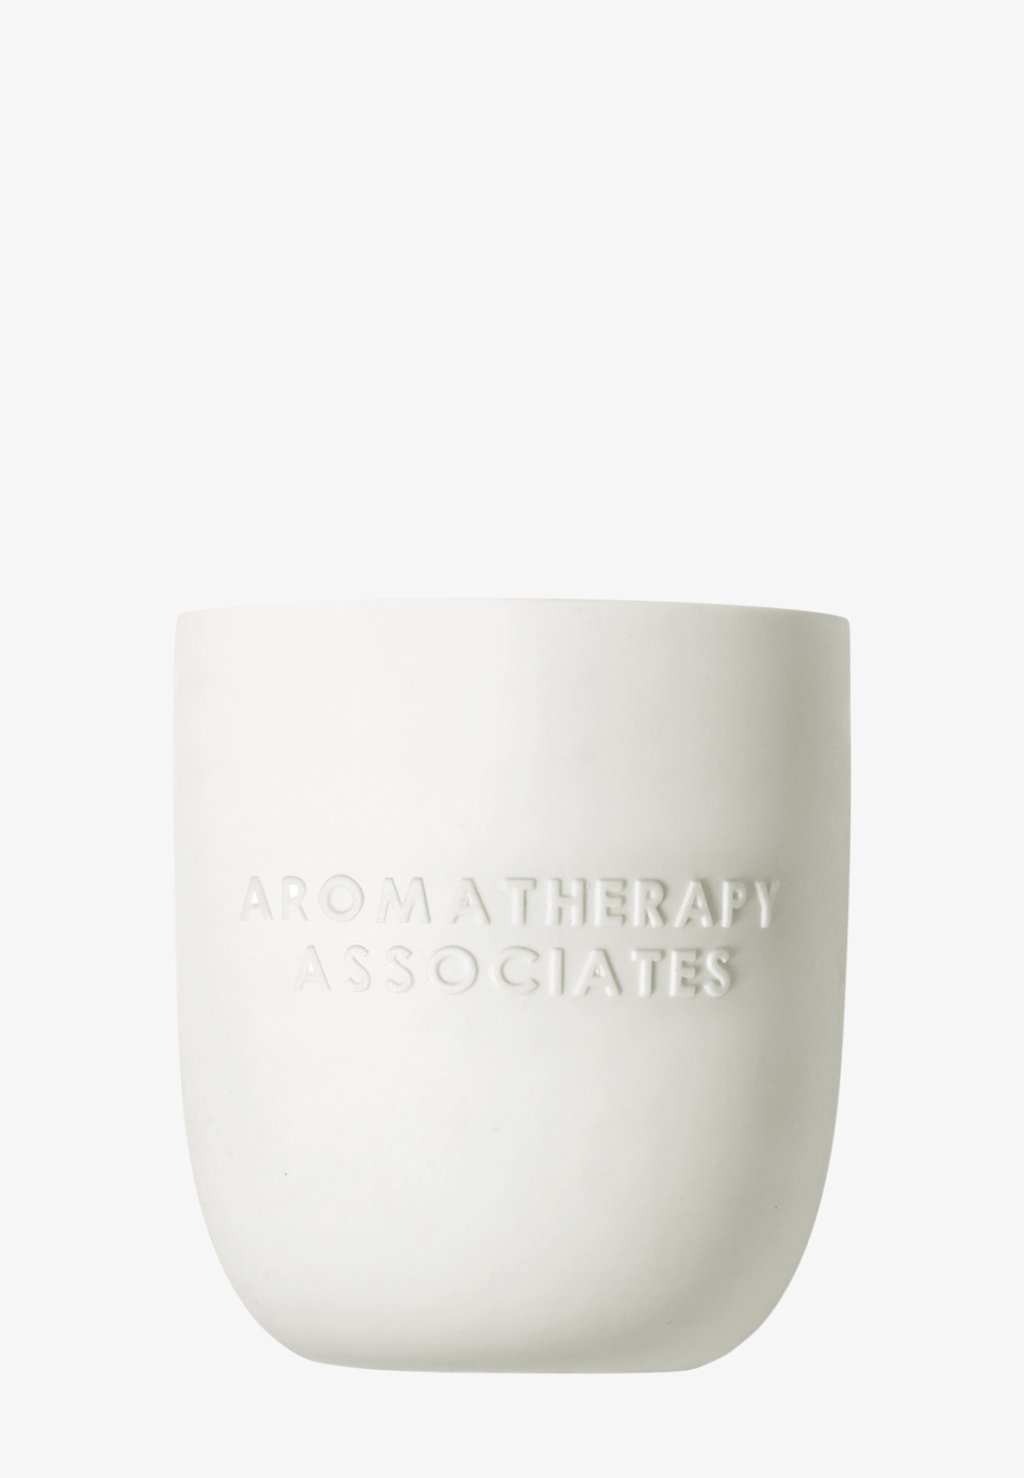 Ароматическая свеча Revive Candle Aromatherapy Associates aromatherapy candle european style romantic handmade aromatherapy candle hand gift natural plant essential oil smokeless soy wax